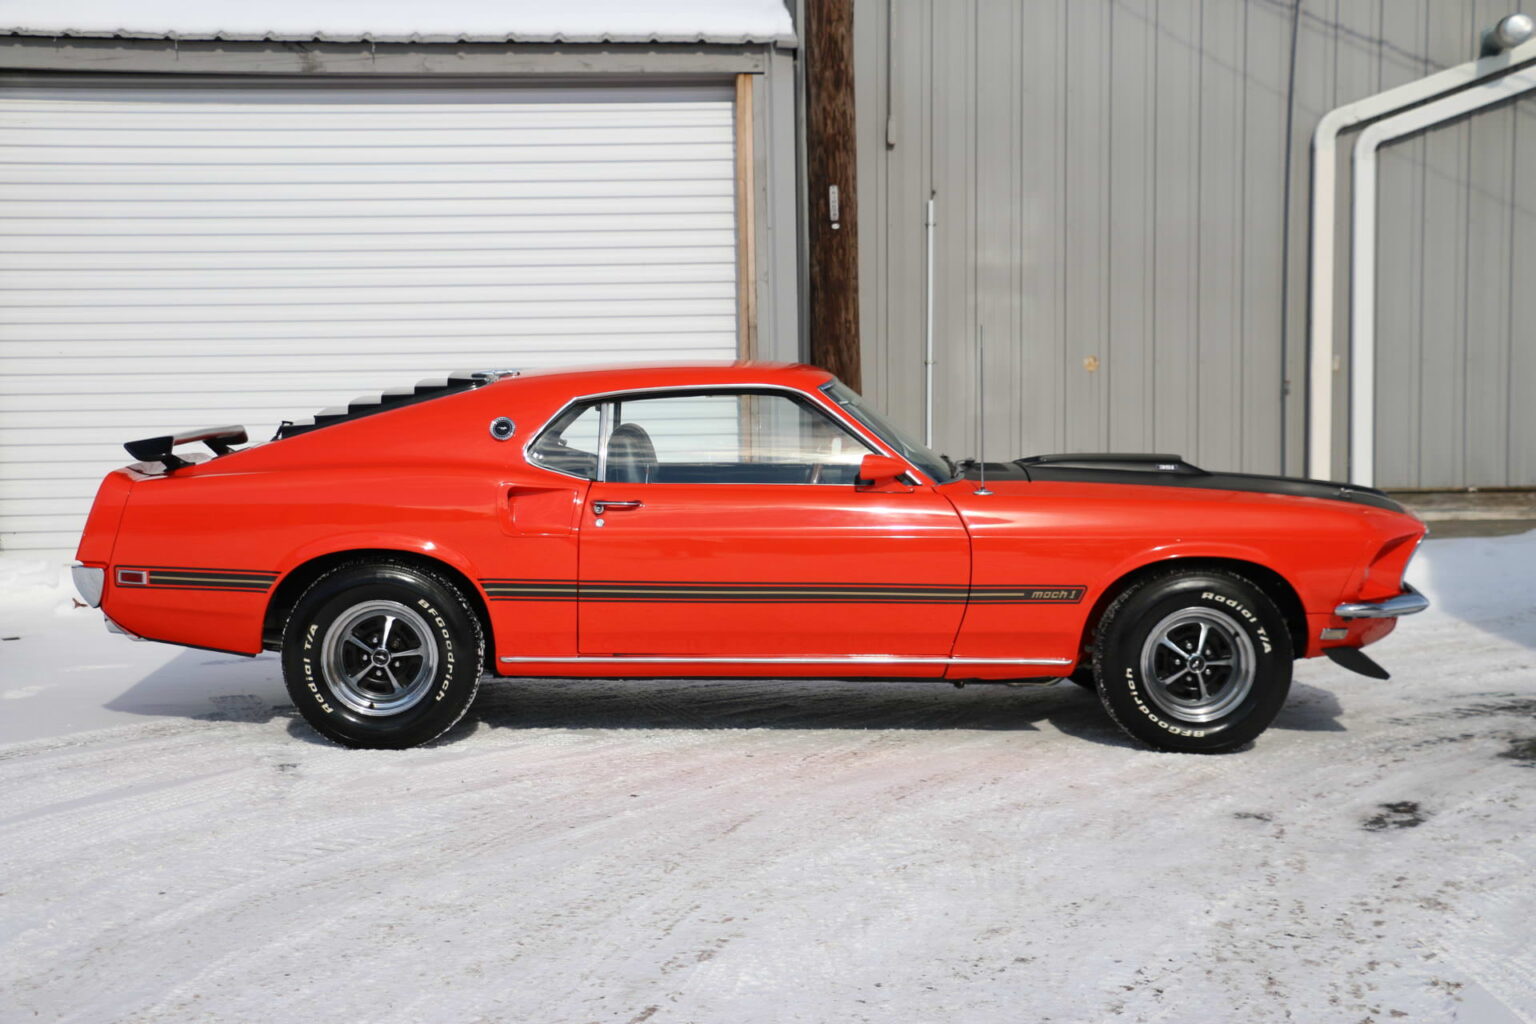 An Uprated 1969 Ford Mustang Mach 1 – Now With 402 hp + 456 lb ft